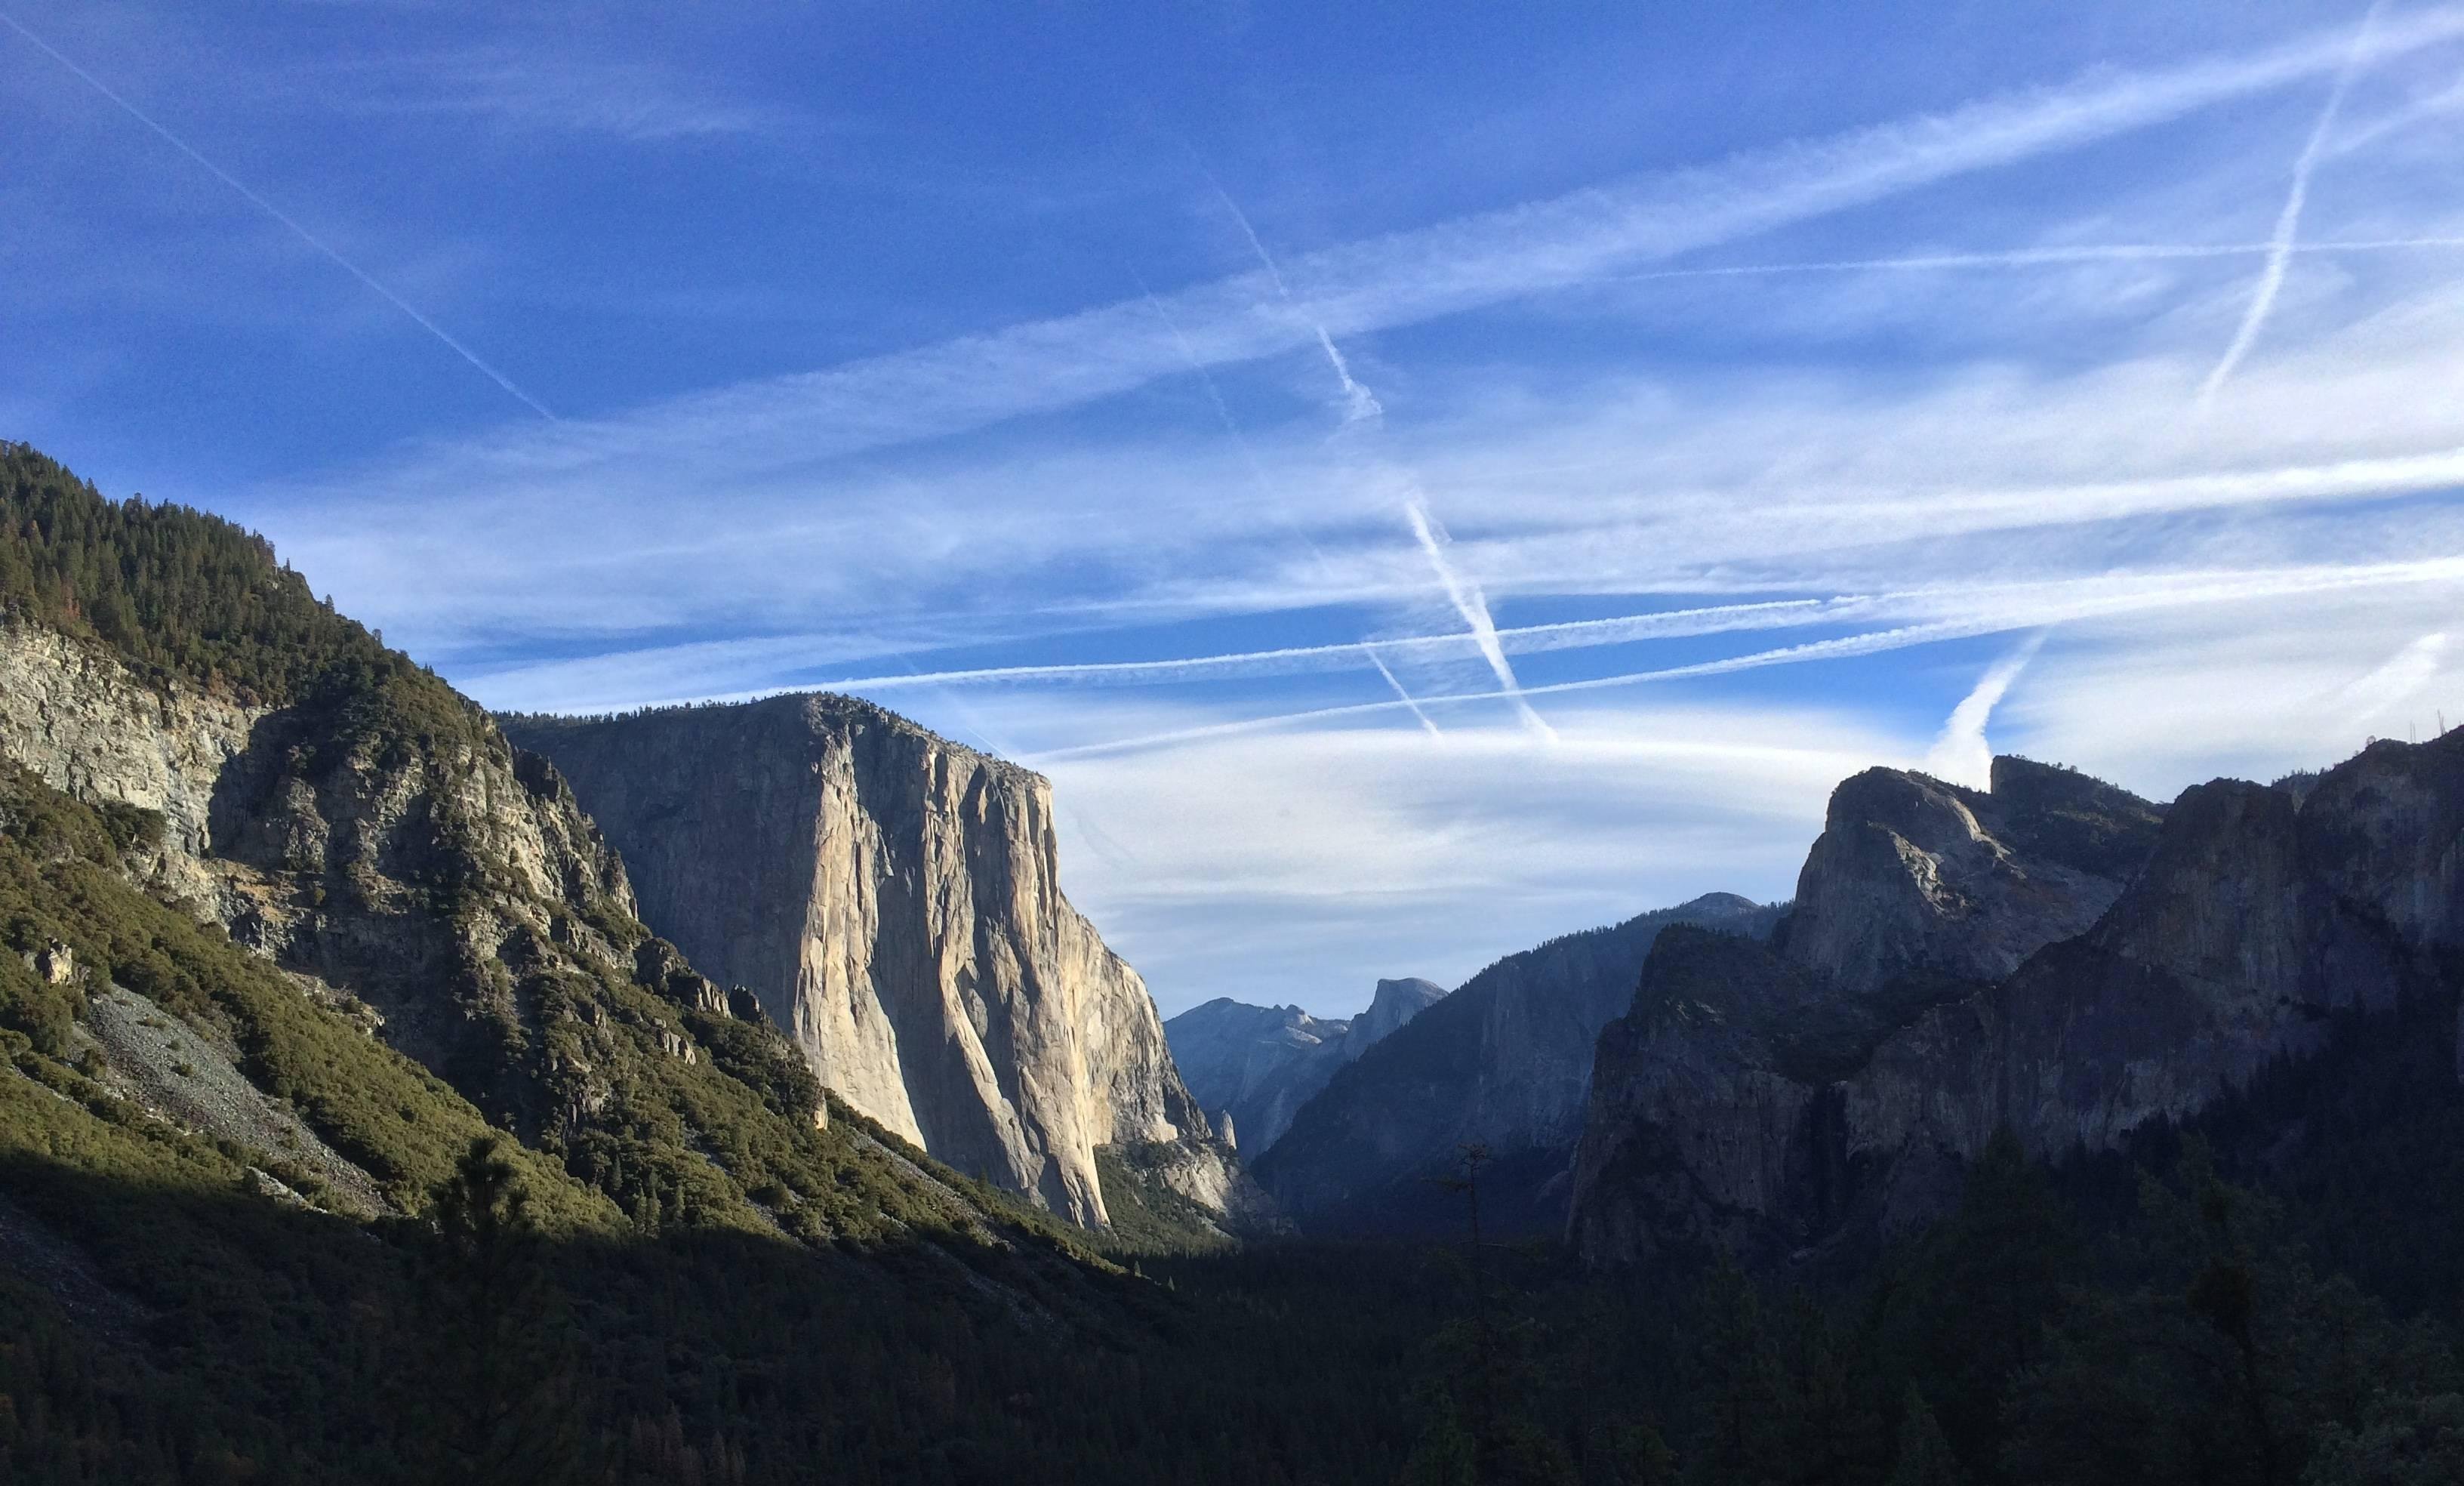 I Only Recently Realized How Good This Picture I Took - Yosemite National Park, Yosemite Valley - HD Wallpaper 